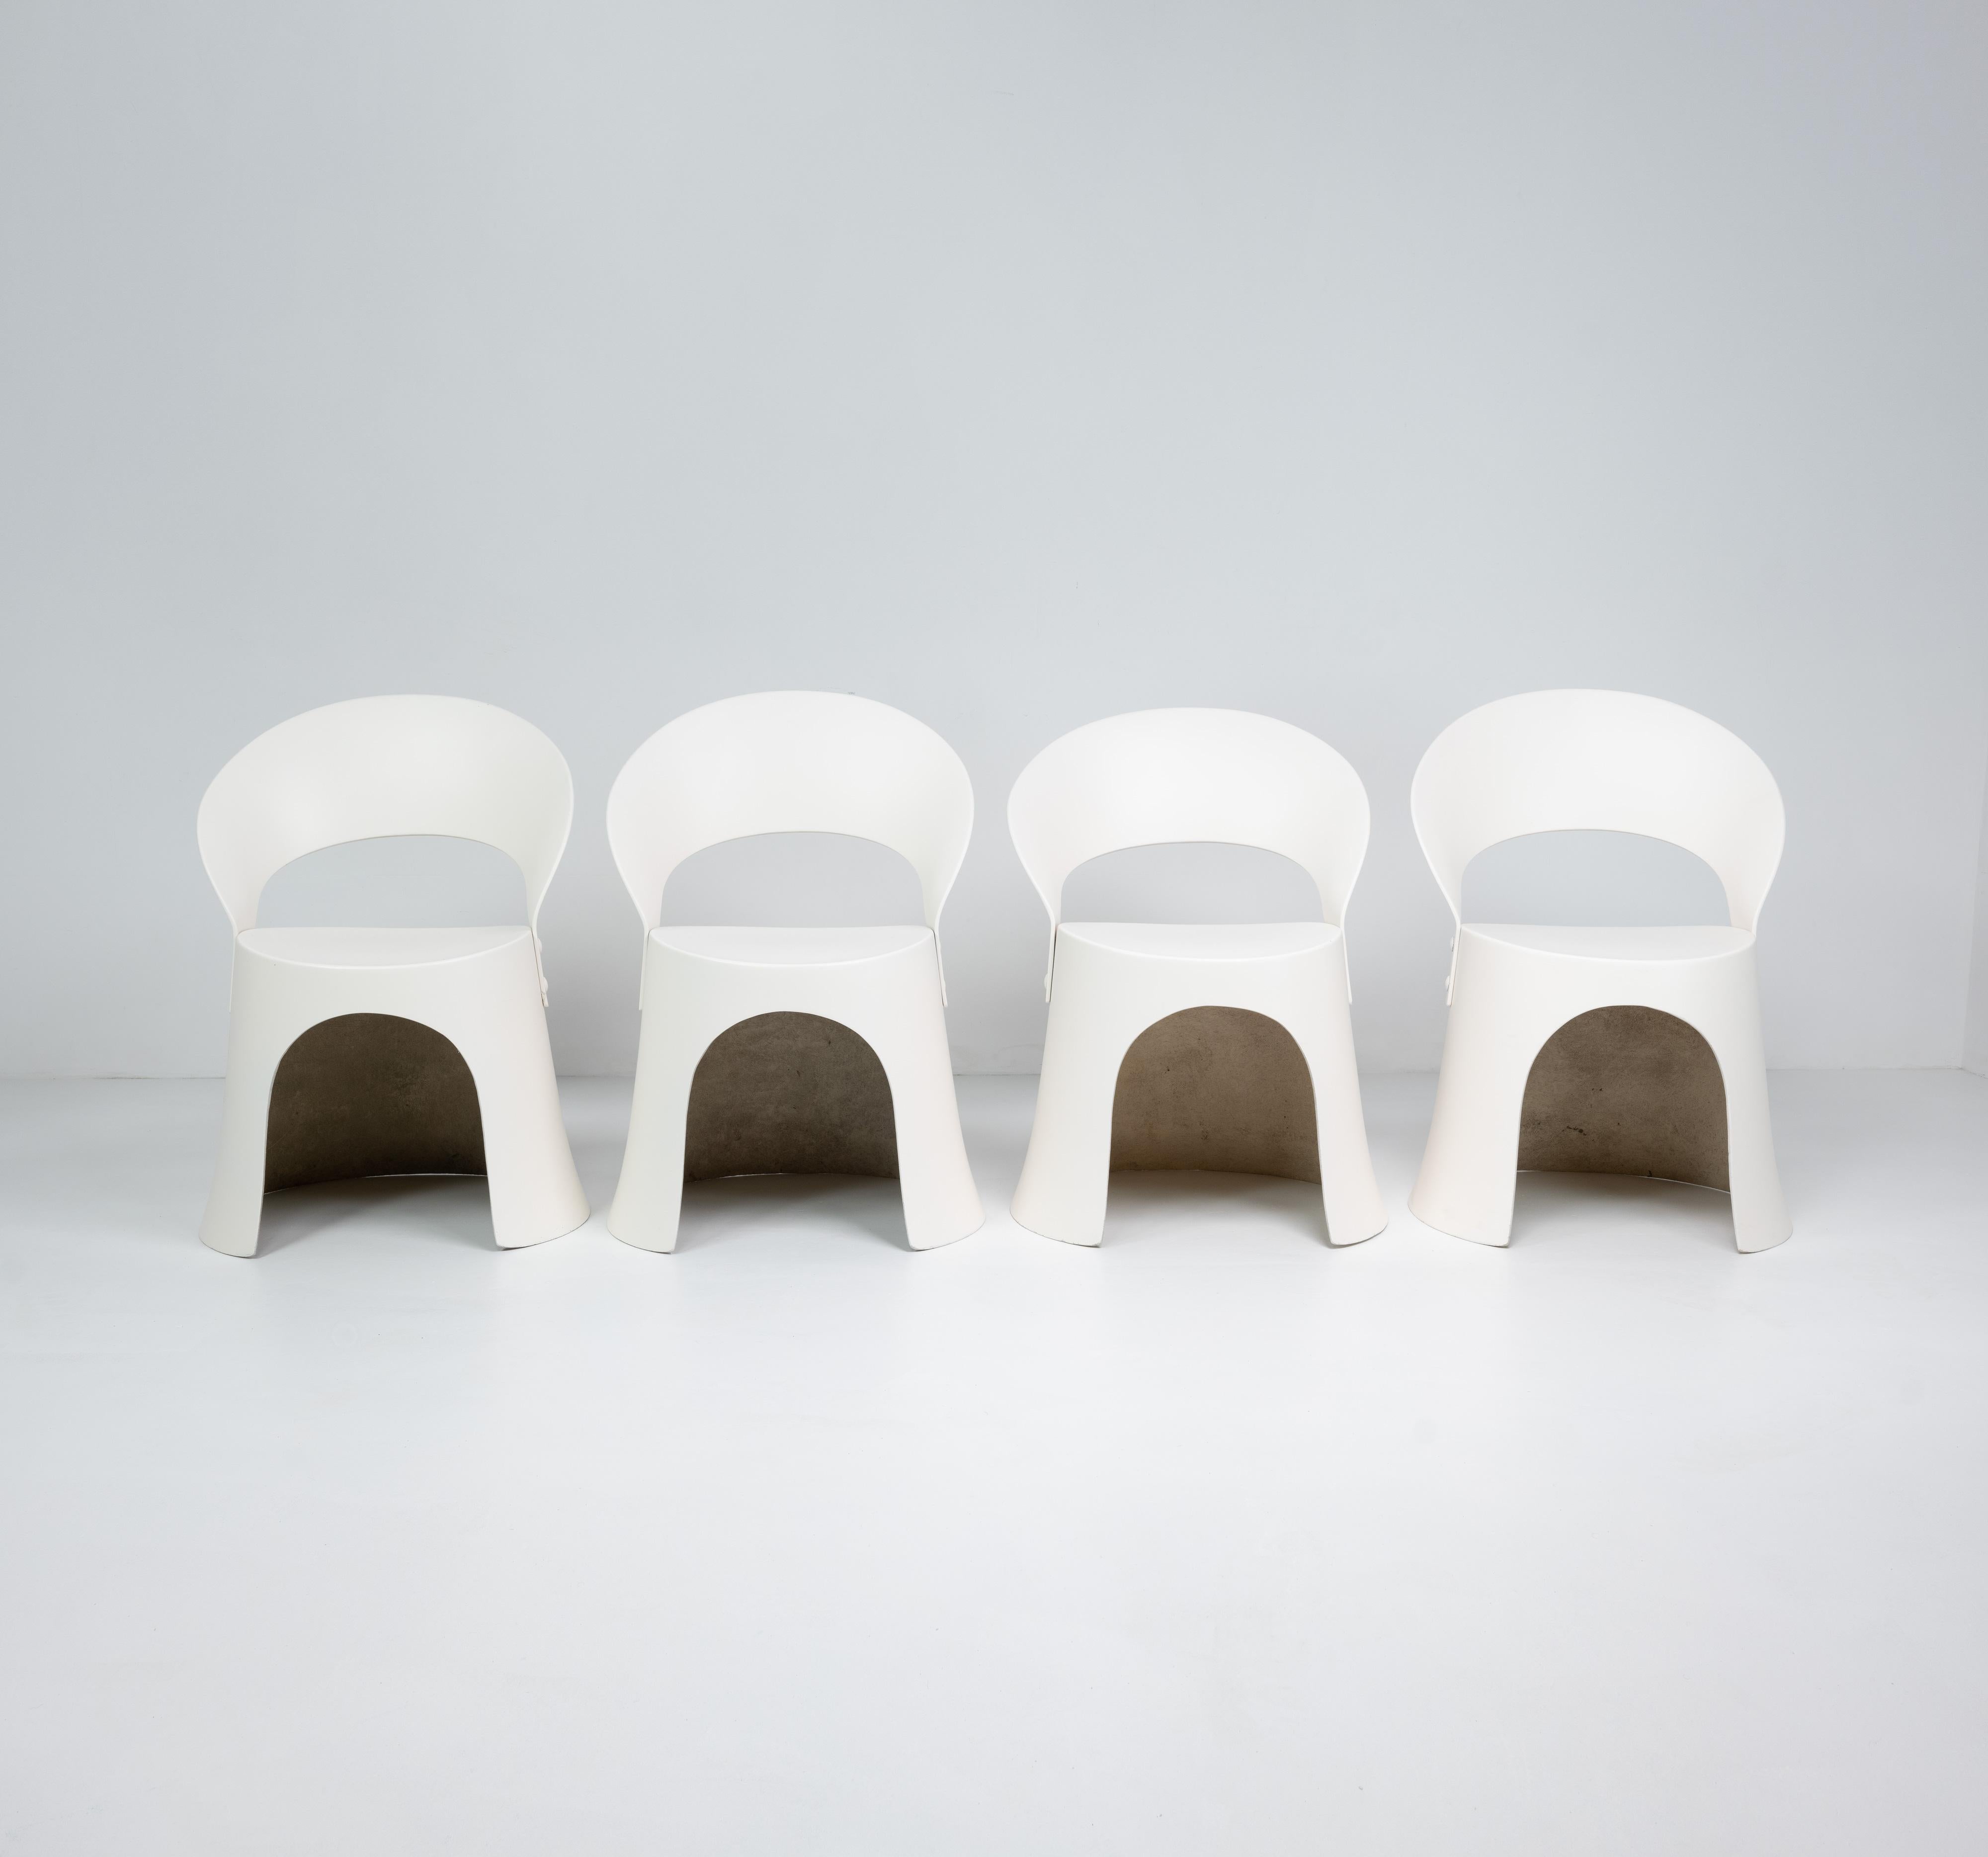 A set of four rare fibreglass chairs designed by Nanna Ditzel and produced by OD Møbler / Domus Danica in 1969. 


Dimensions (cm, approx): 
Height: 78
Width: 55
Depth: 52
Height to seat: 45.